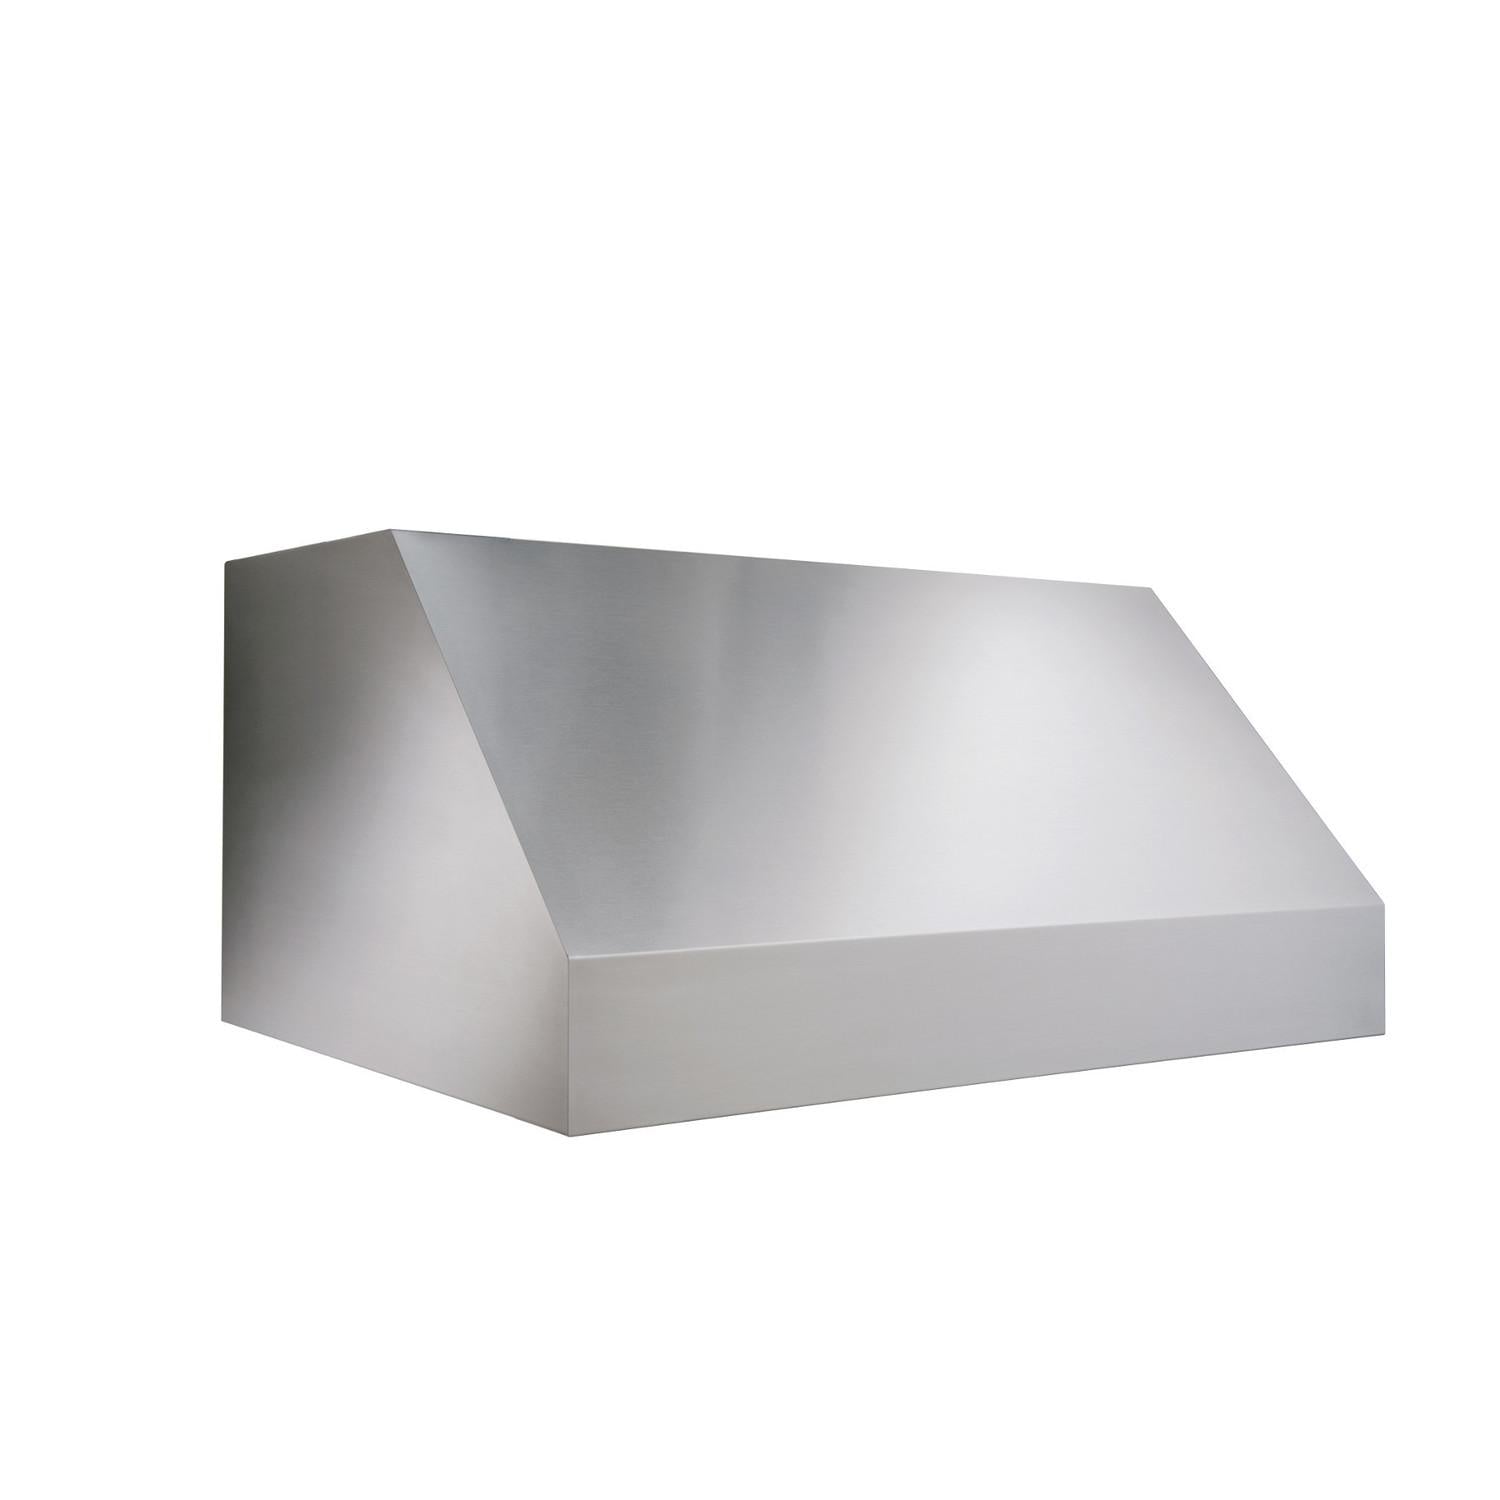 Broan® EPD61 Series 60-inch Pro-Style Outdoor Range Hood, 1290 Max Blower CFM, Stainless Steel